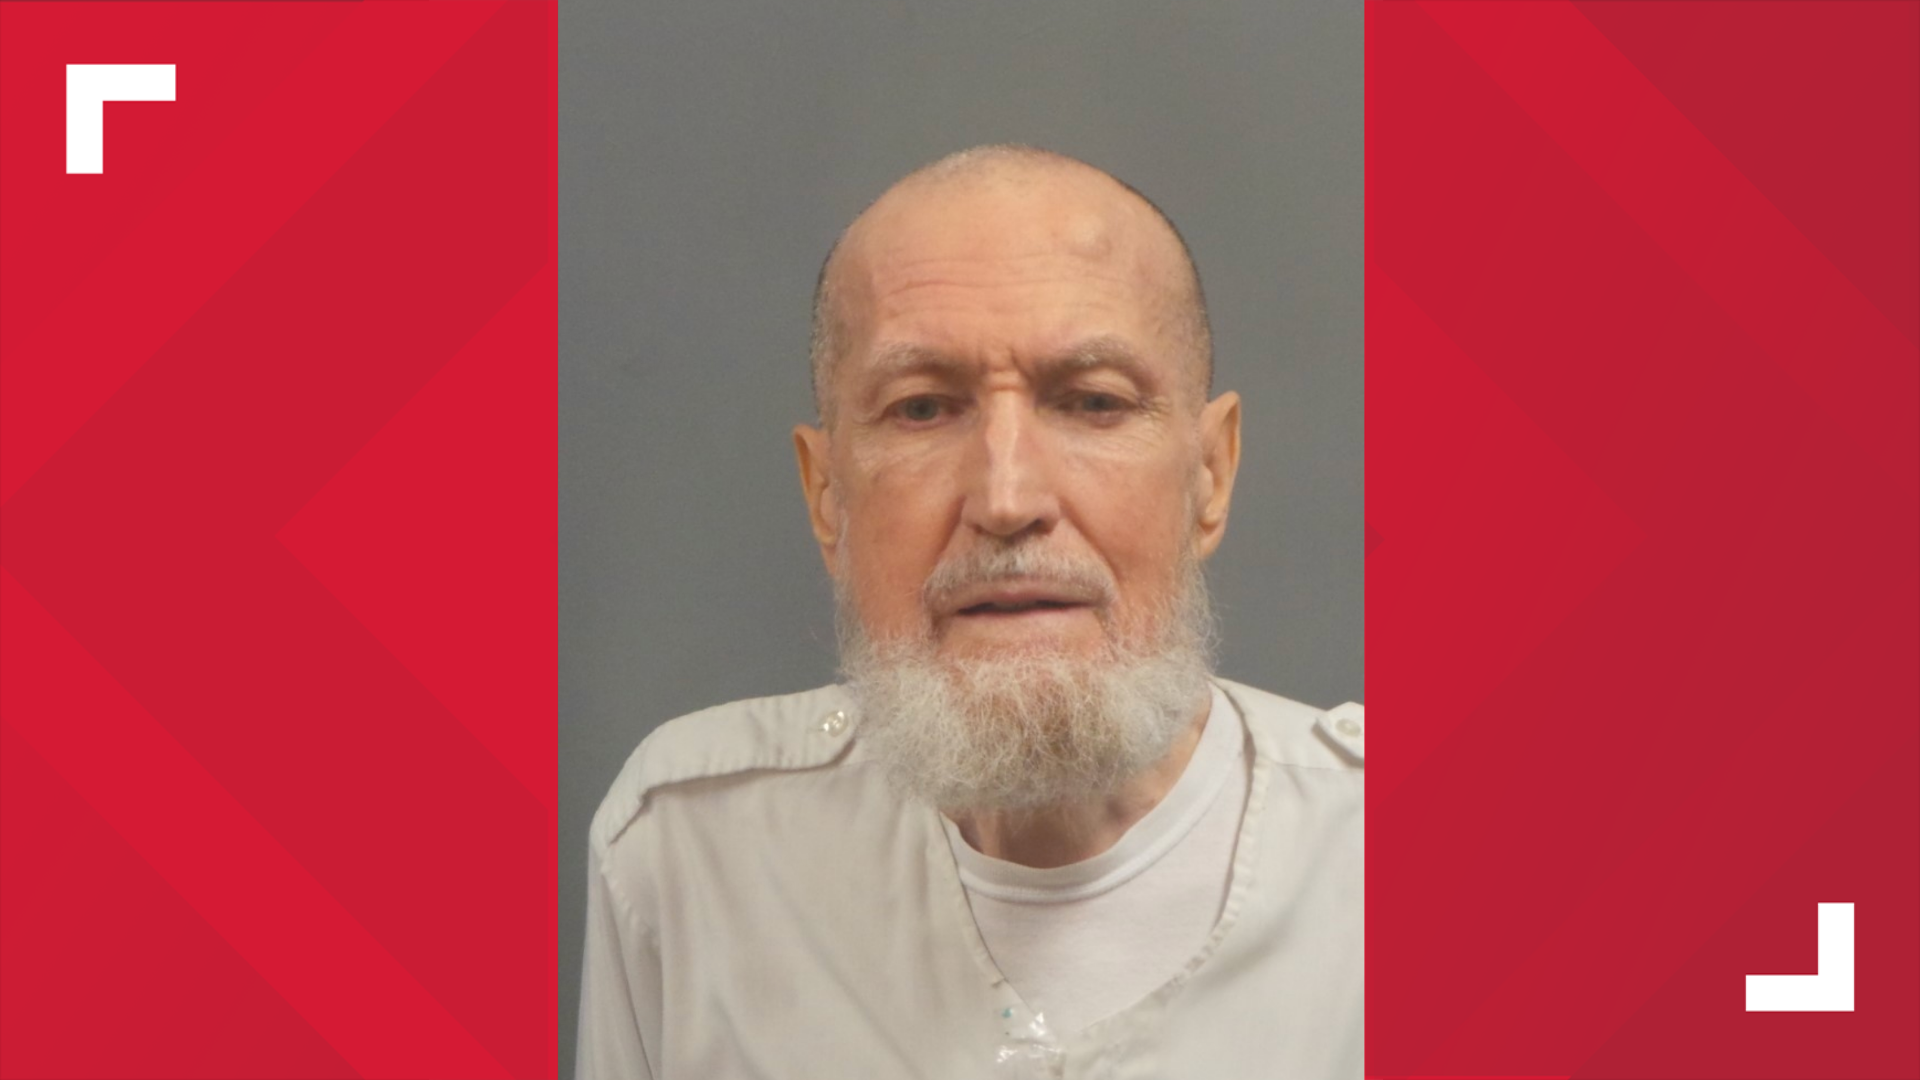 Richard Thomas Brown, 78, was arrested on a charge of aggravated sexual assault of a child. He met the girl at St. Mark the Evangelist Catholic Church in Plano.